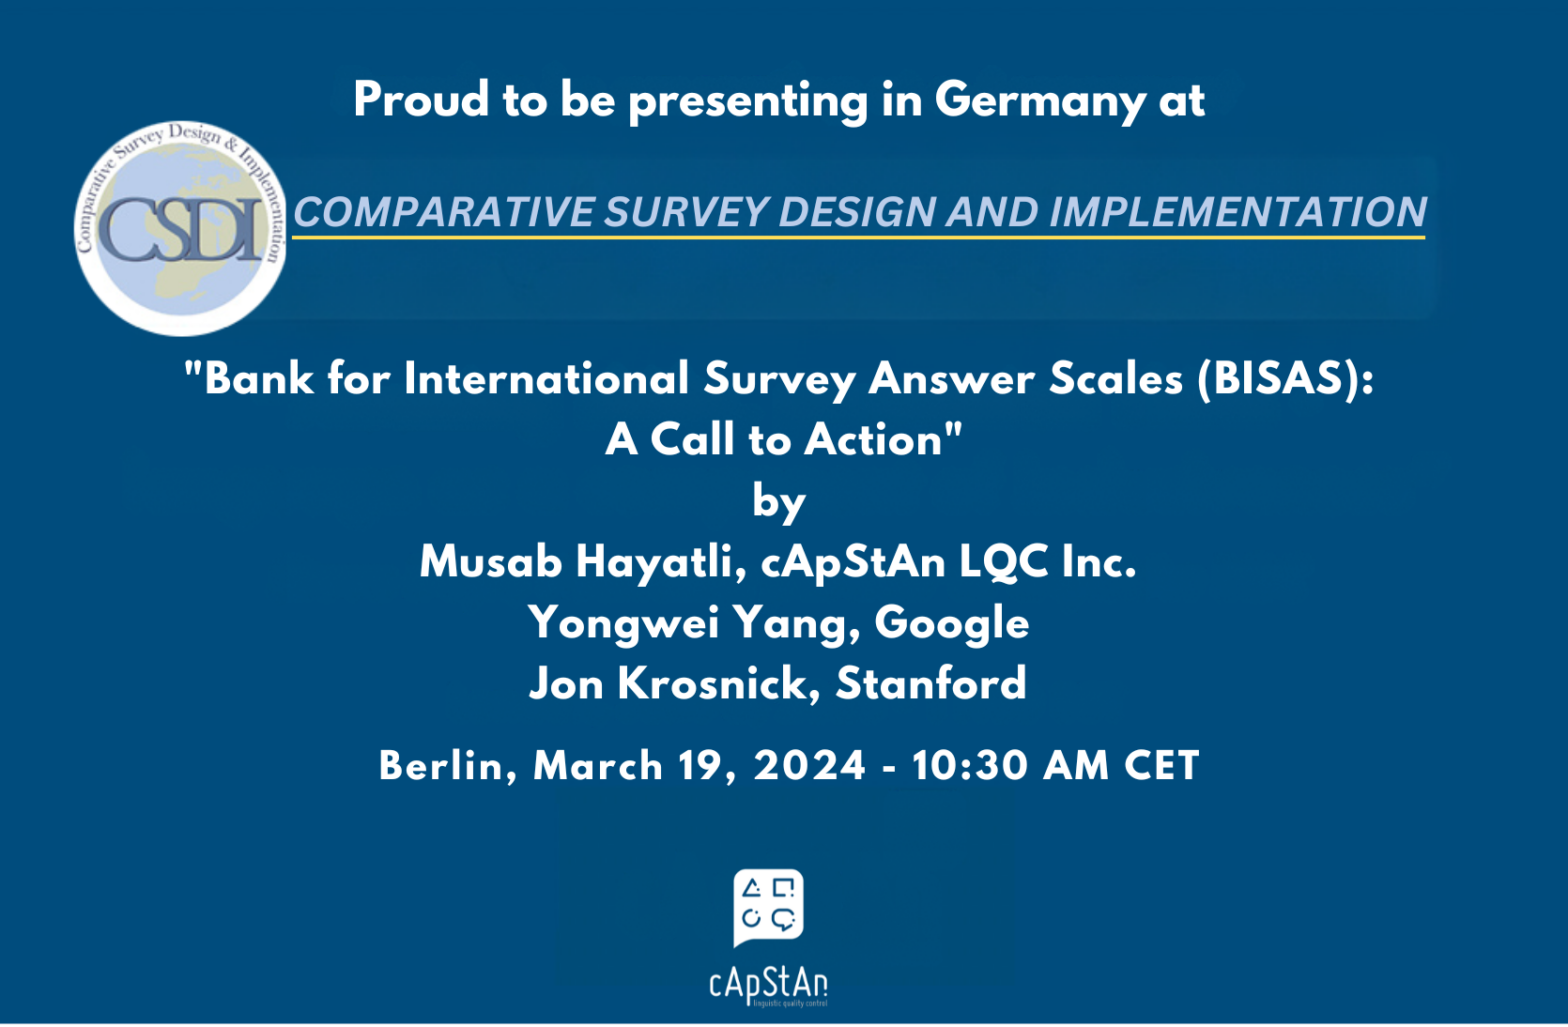 The CSDI (Comparative Survey Design and Implementation) Workshop at the SHARE BERLIN Institute GmbH in Berlin, Germany